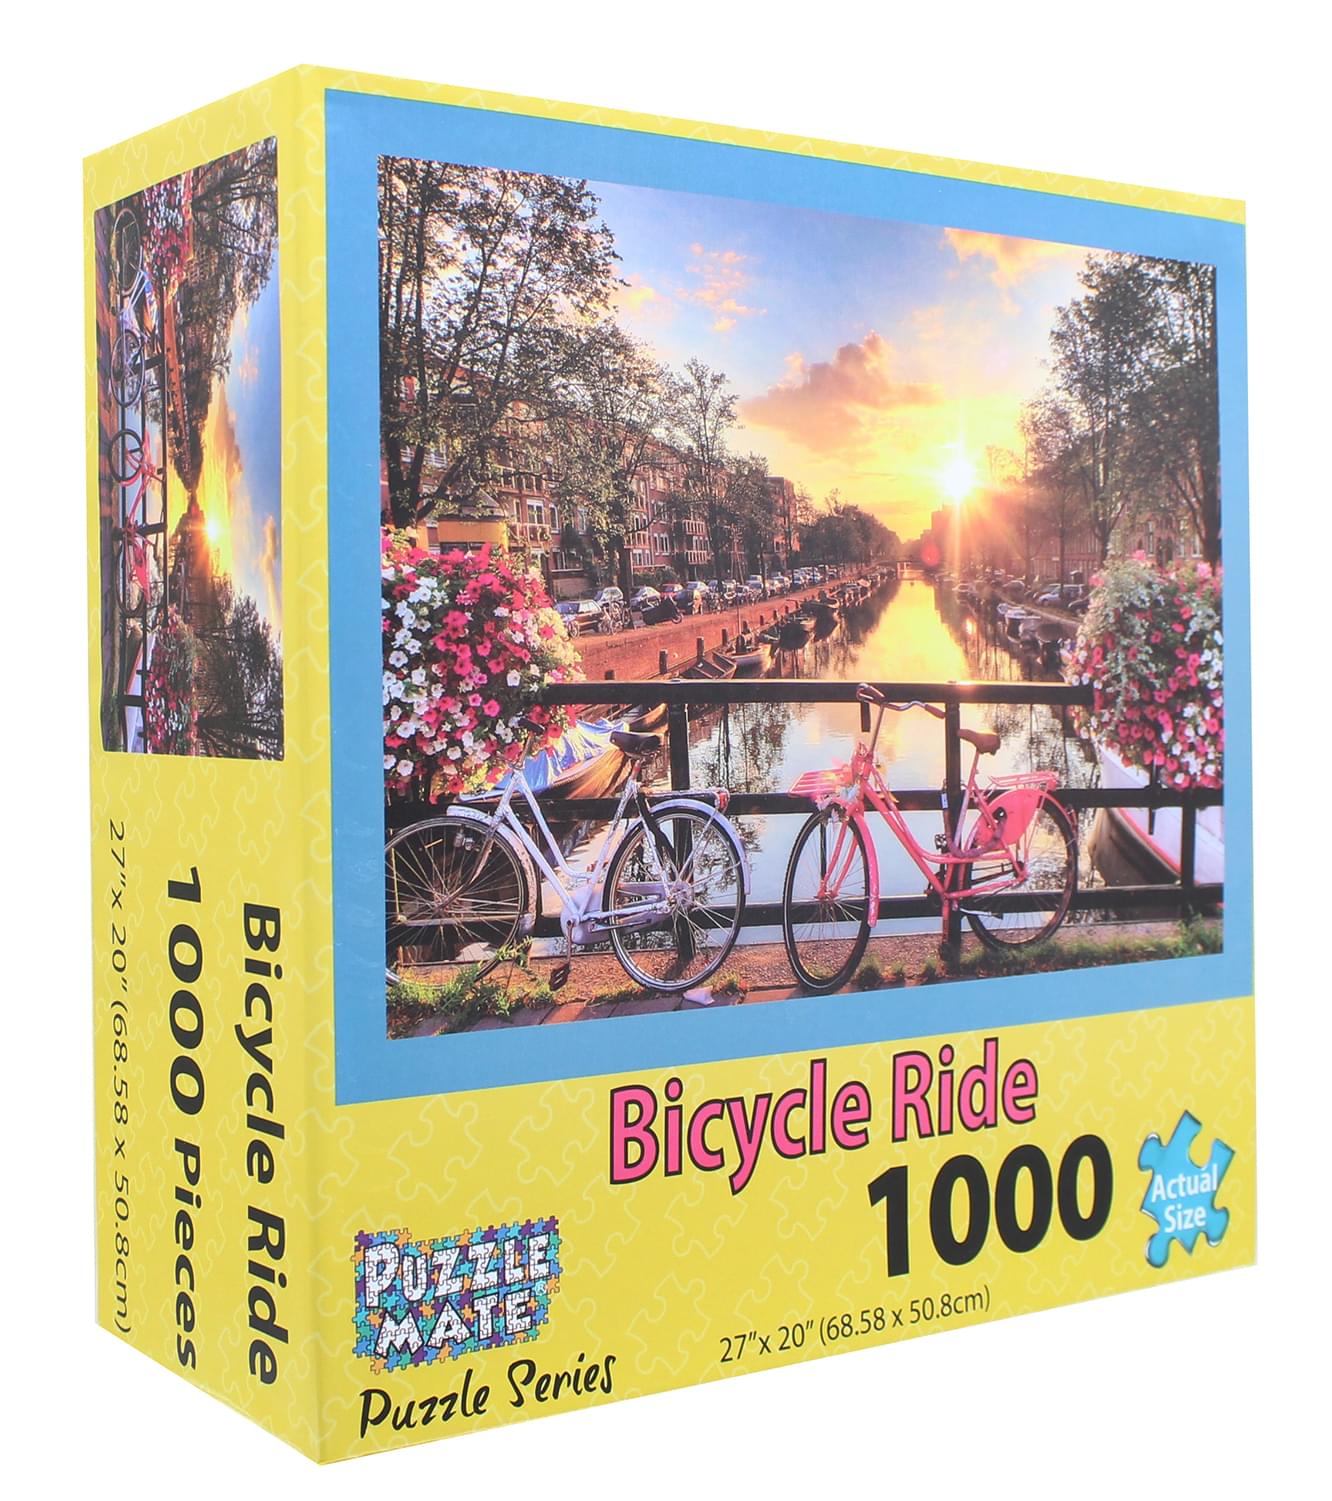 Bicycle Ride 1000 Piece Jigsaw Puzzle